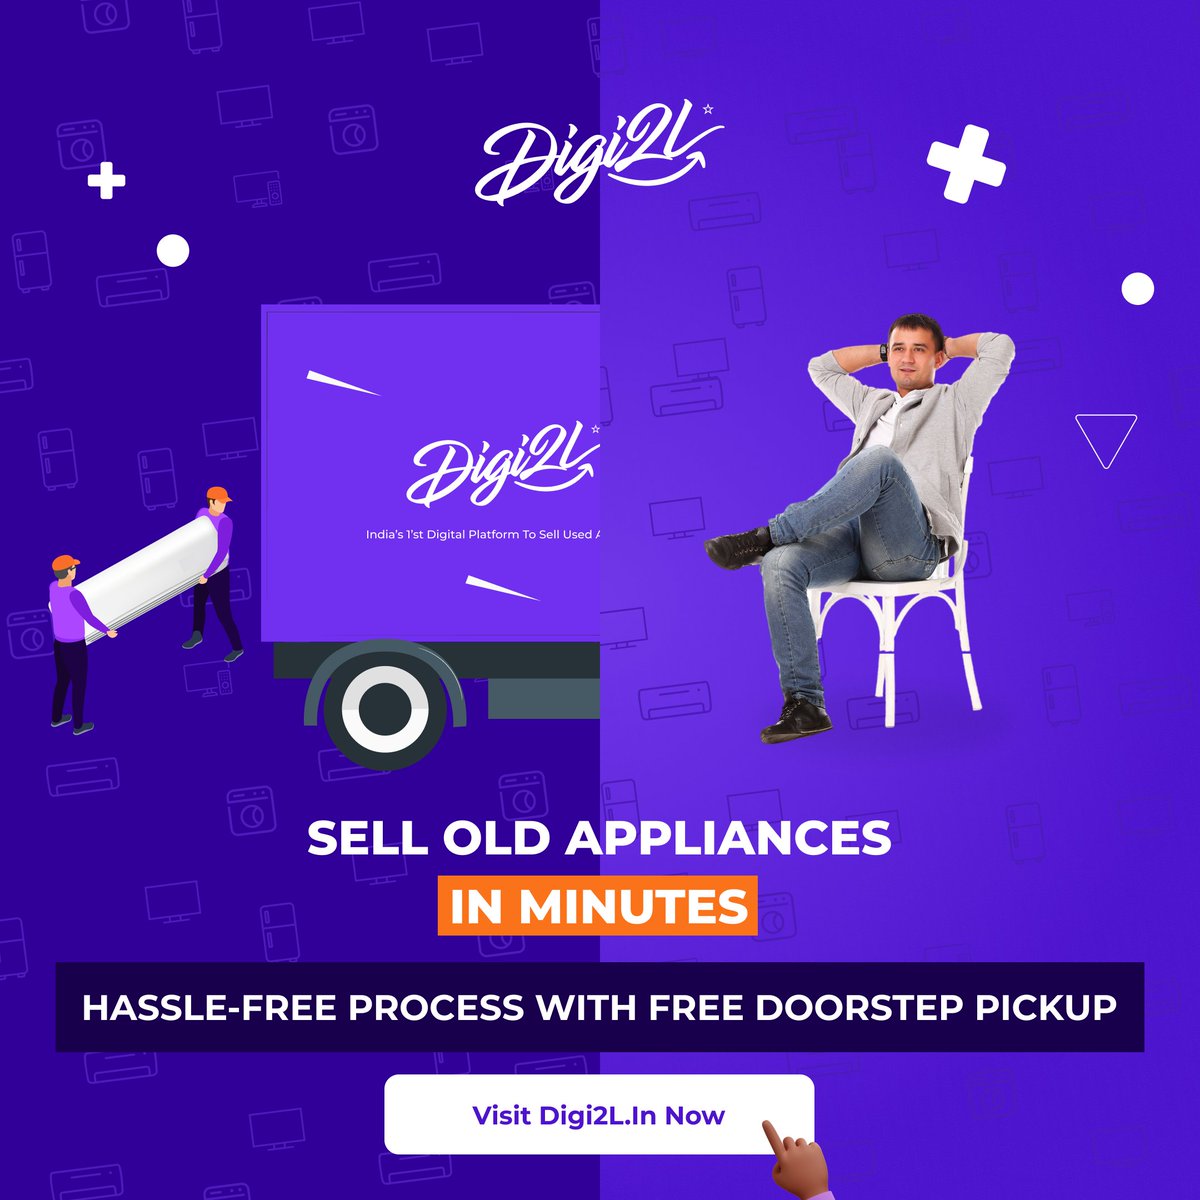 Selling old appliance made easy​ ⚡
.
.
.
#Hasslefree #Trending #Oldappliance #Selloldappliances #Appliances #Digi2L